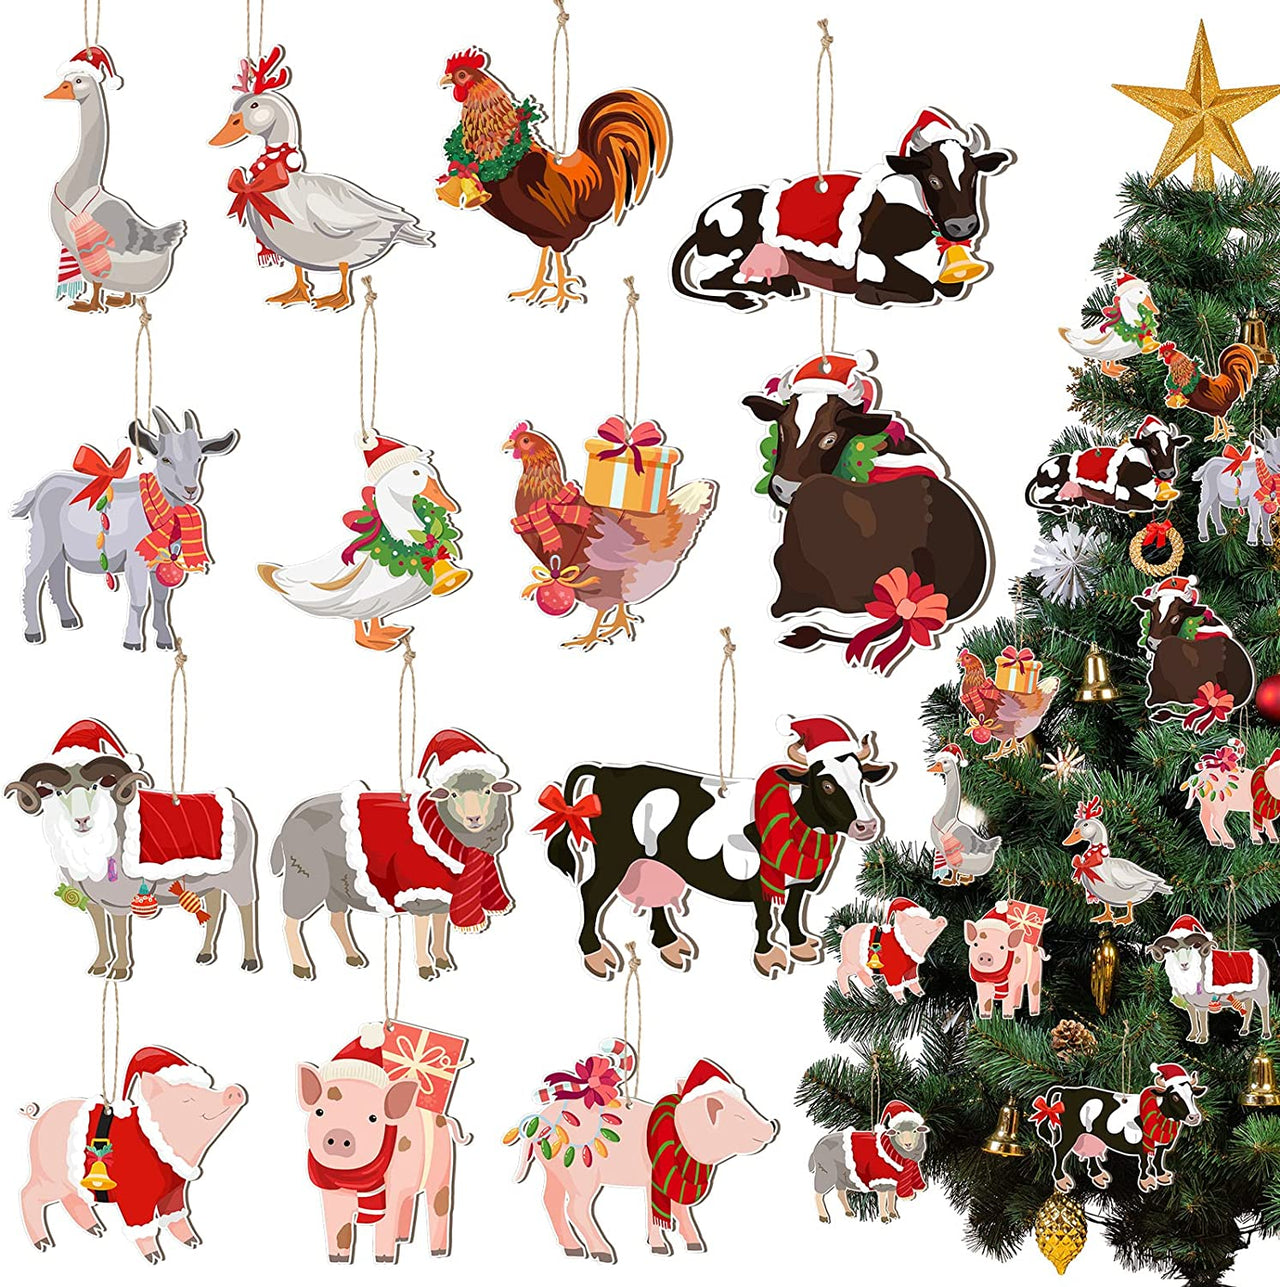 14 Pieces Christmas Farm Animals Ornament 4.7 Inch Wood Pig Chicken Sheep Duck Christmas Ornaments Country Farmhouse Holiday Decor for Christmas Tree Decoration Crafts